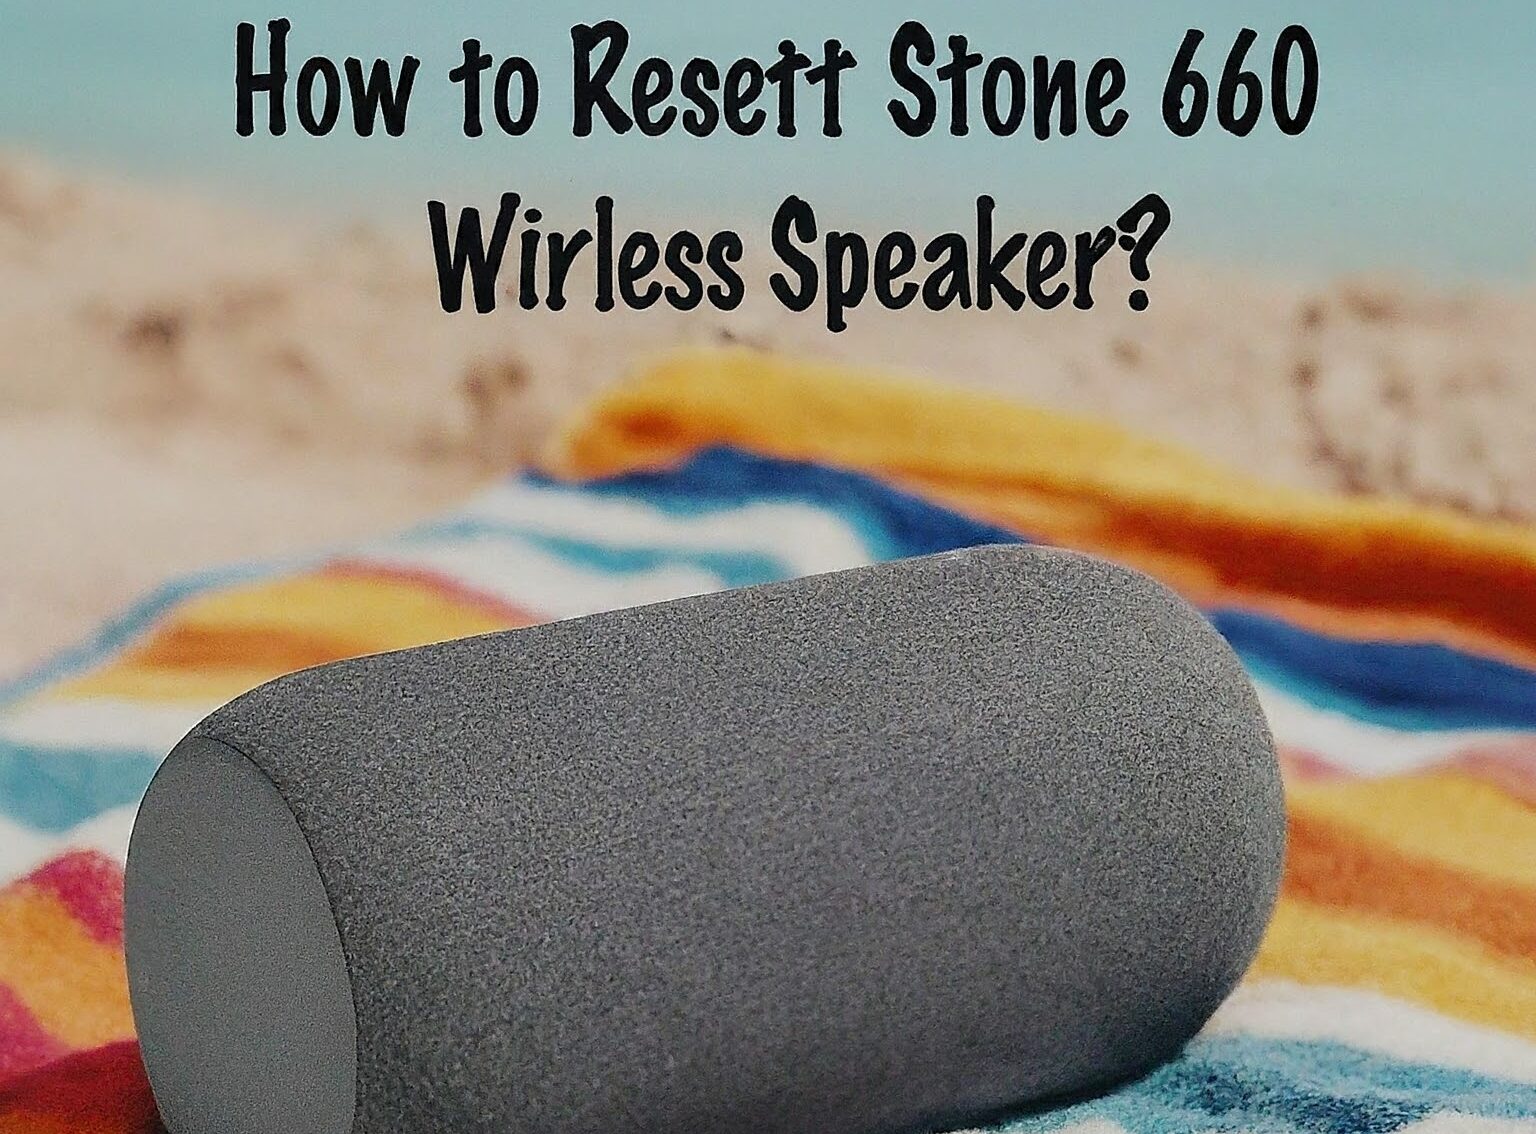 A photo of a gray Boat Stone 650 wireless speaker on a colorful beach towel. The text "How to reset BoAt Stone 650 Bluetooth wireless speaker?" is written above the speaker in a bold, blue font.